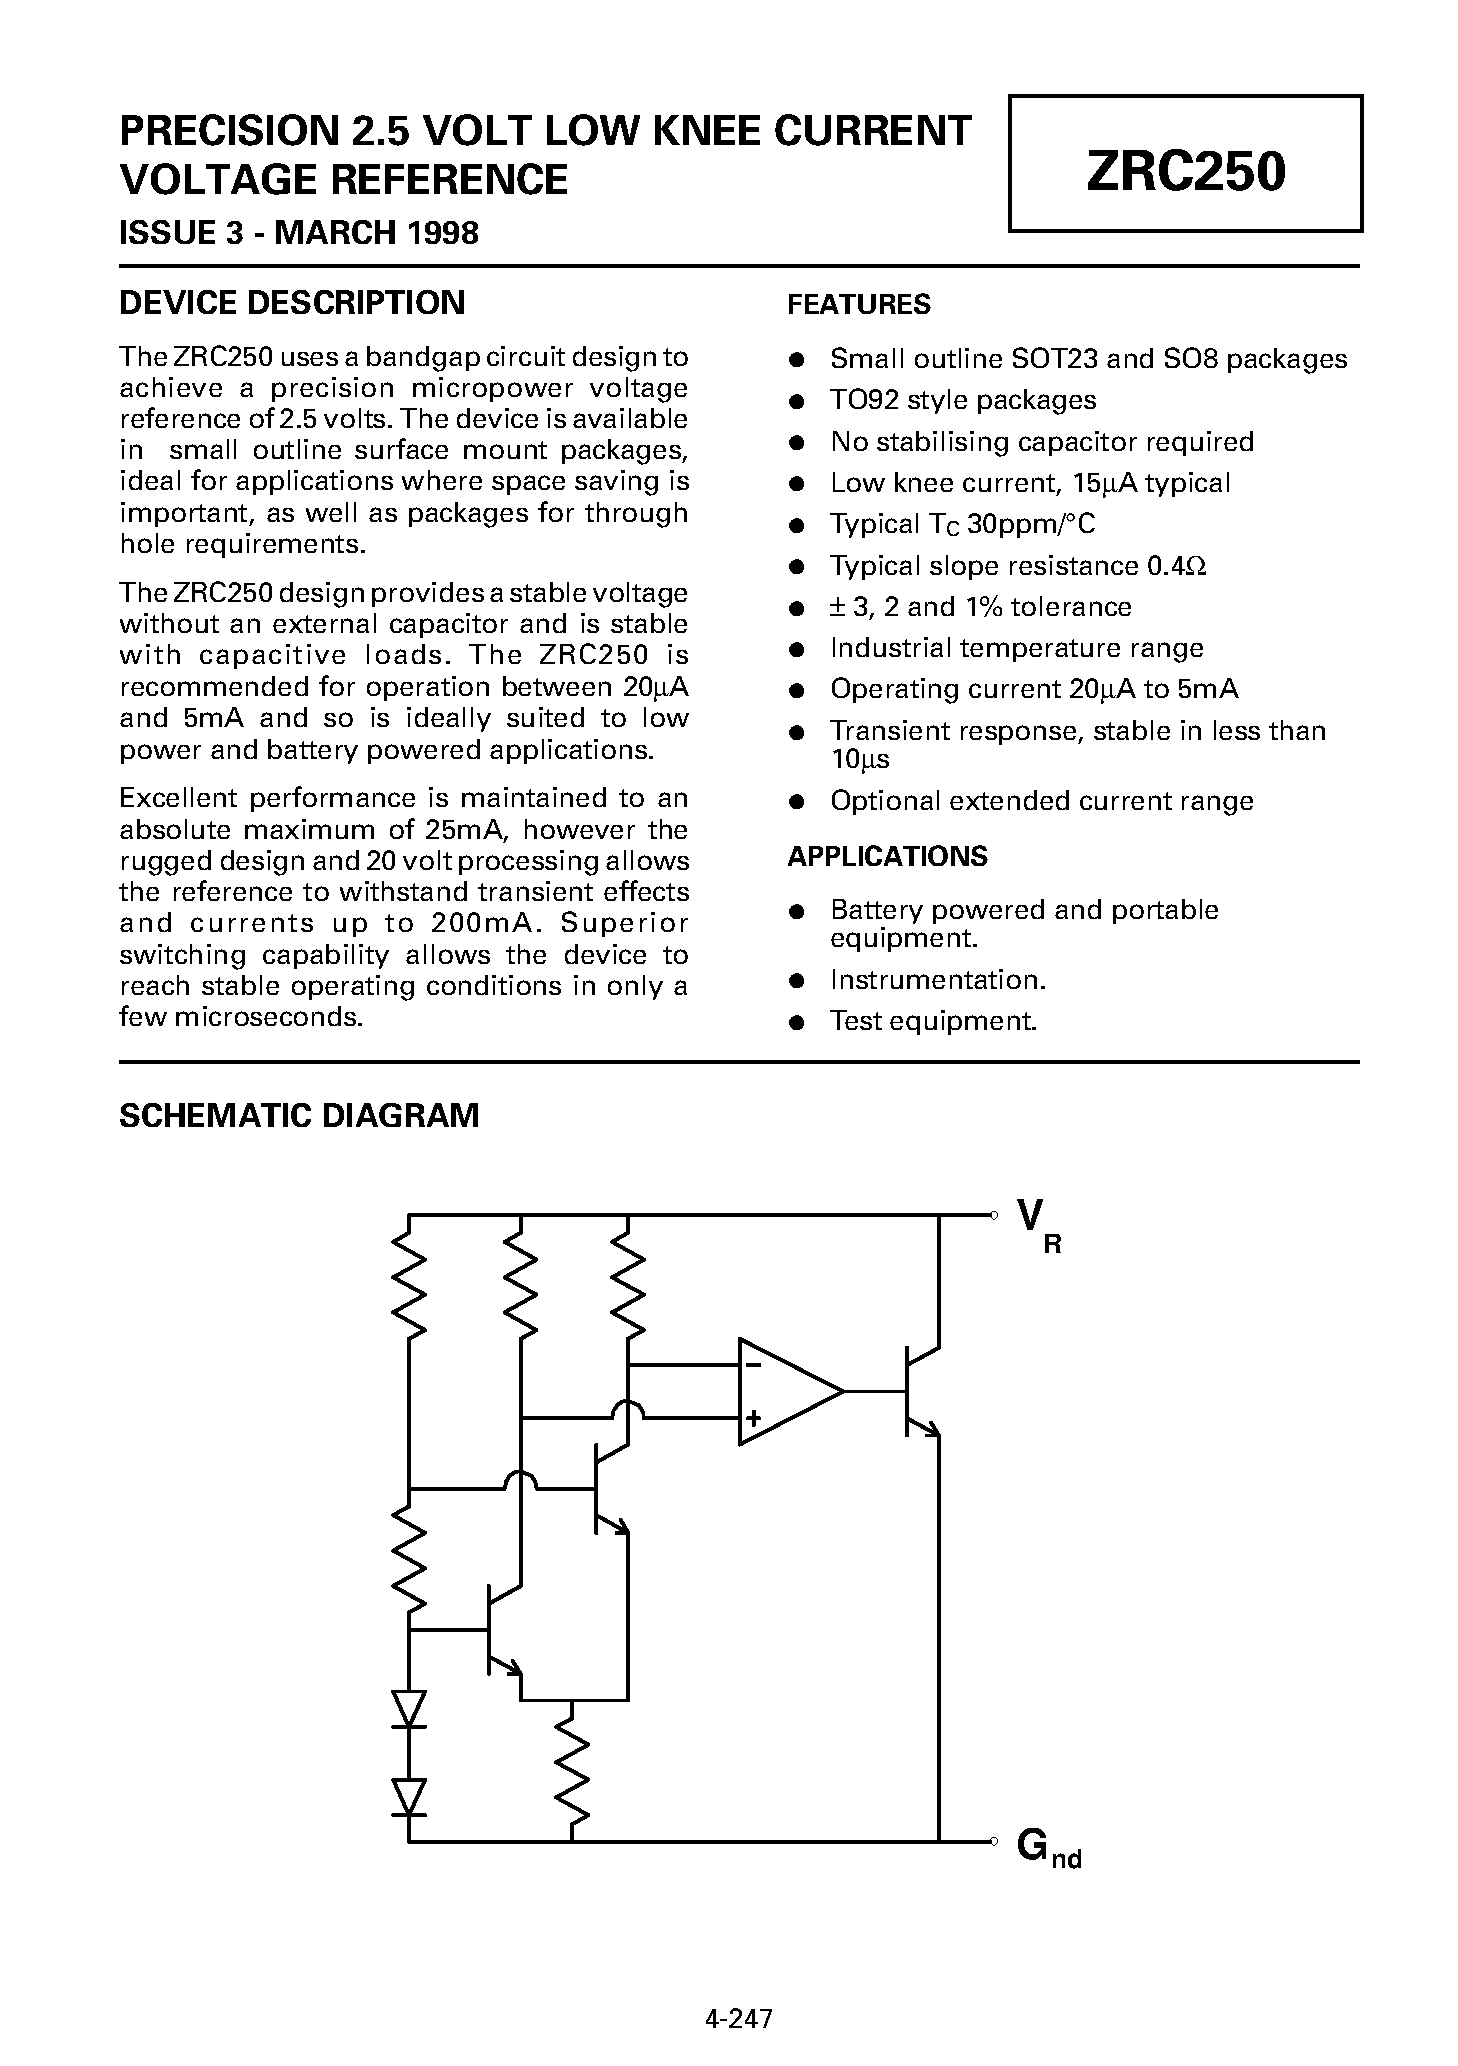 Datasheet ZRC250N802 - PRECISION 2.5 VOLT LOW KNEE CURRENT VOLTAGE REFERENCE page 1